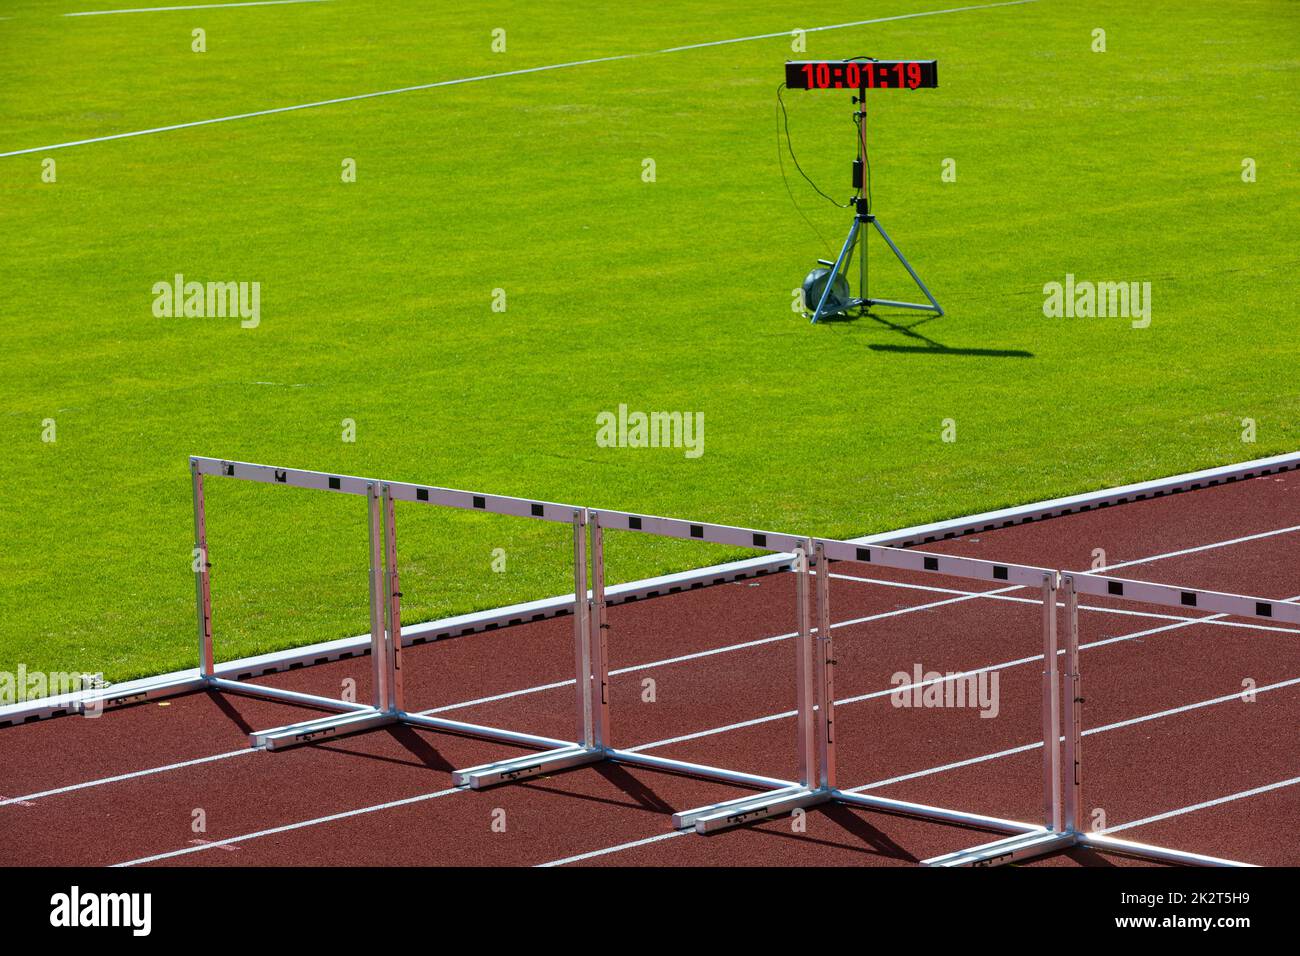 hurdles with time measurement system Stock Photo